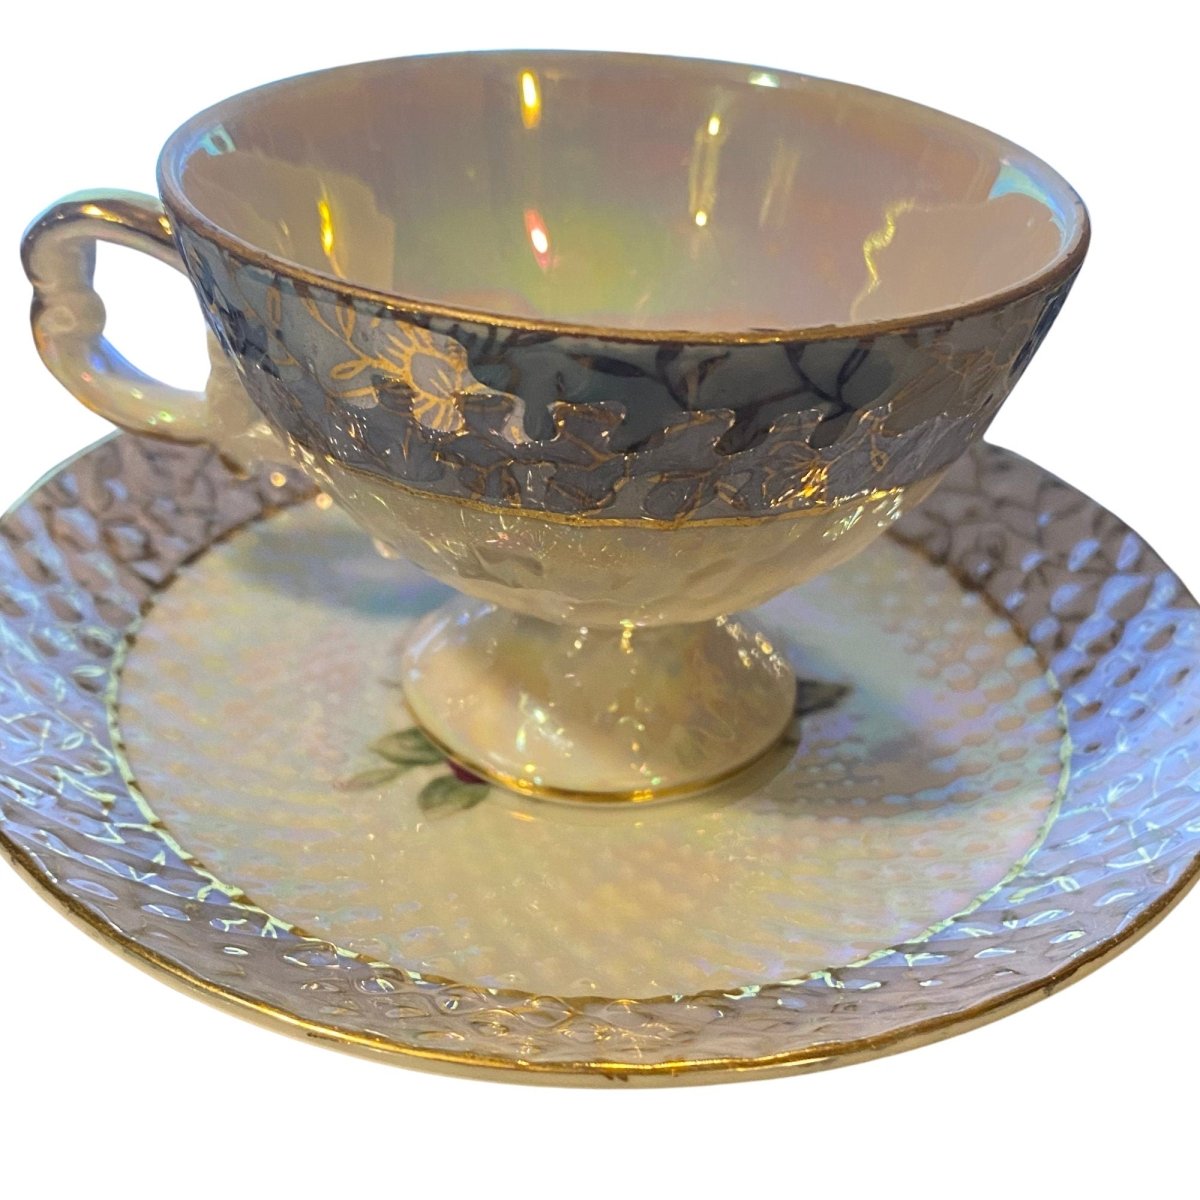 Lusterware | Pale Blue, Pedestal Footed Mocha Cup with Rose Corsage Decoration & Gilded Handle, from Japanese Manufacturer Maruei - Chinamania.shop